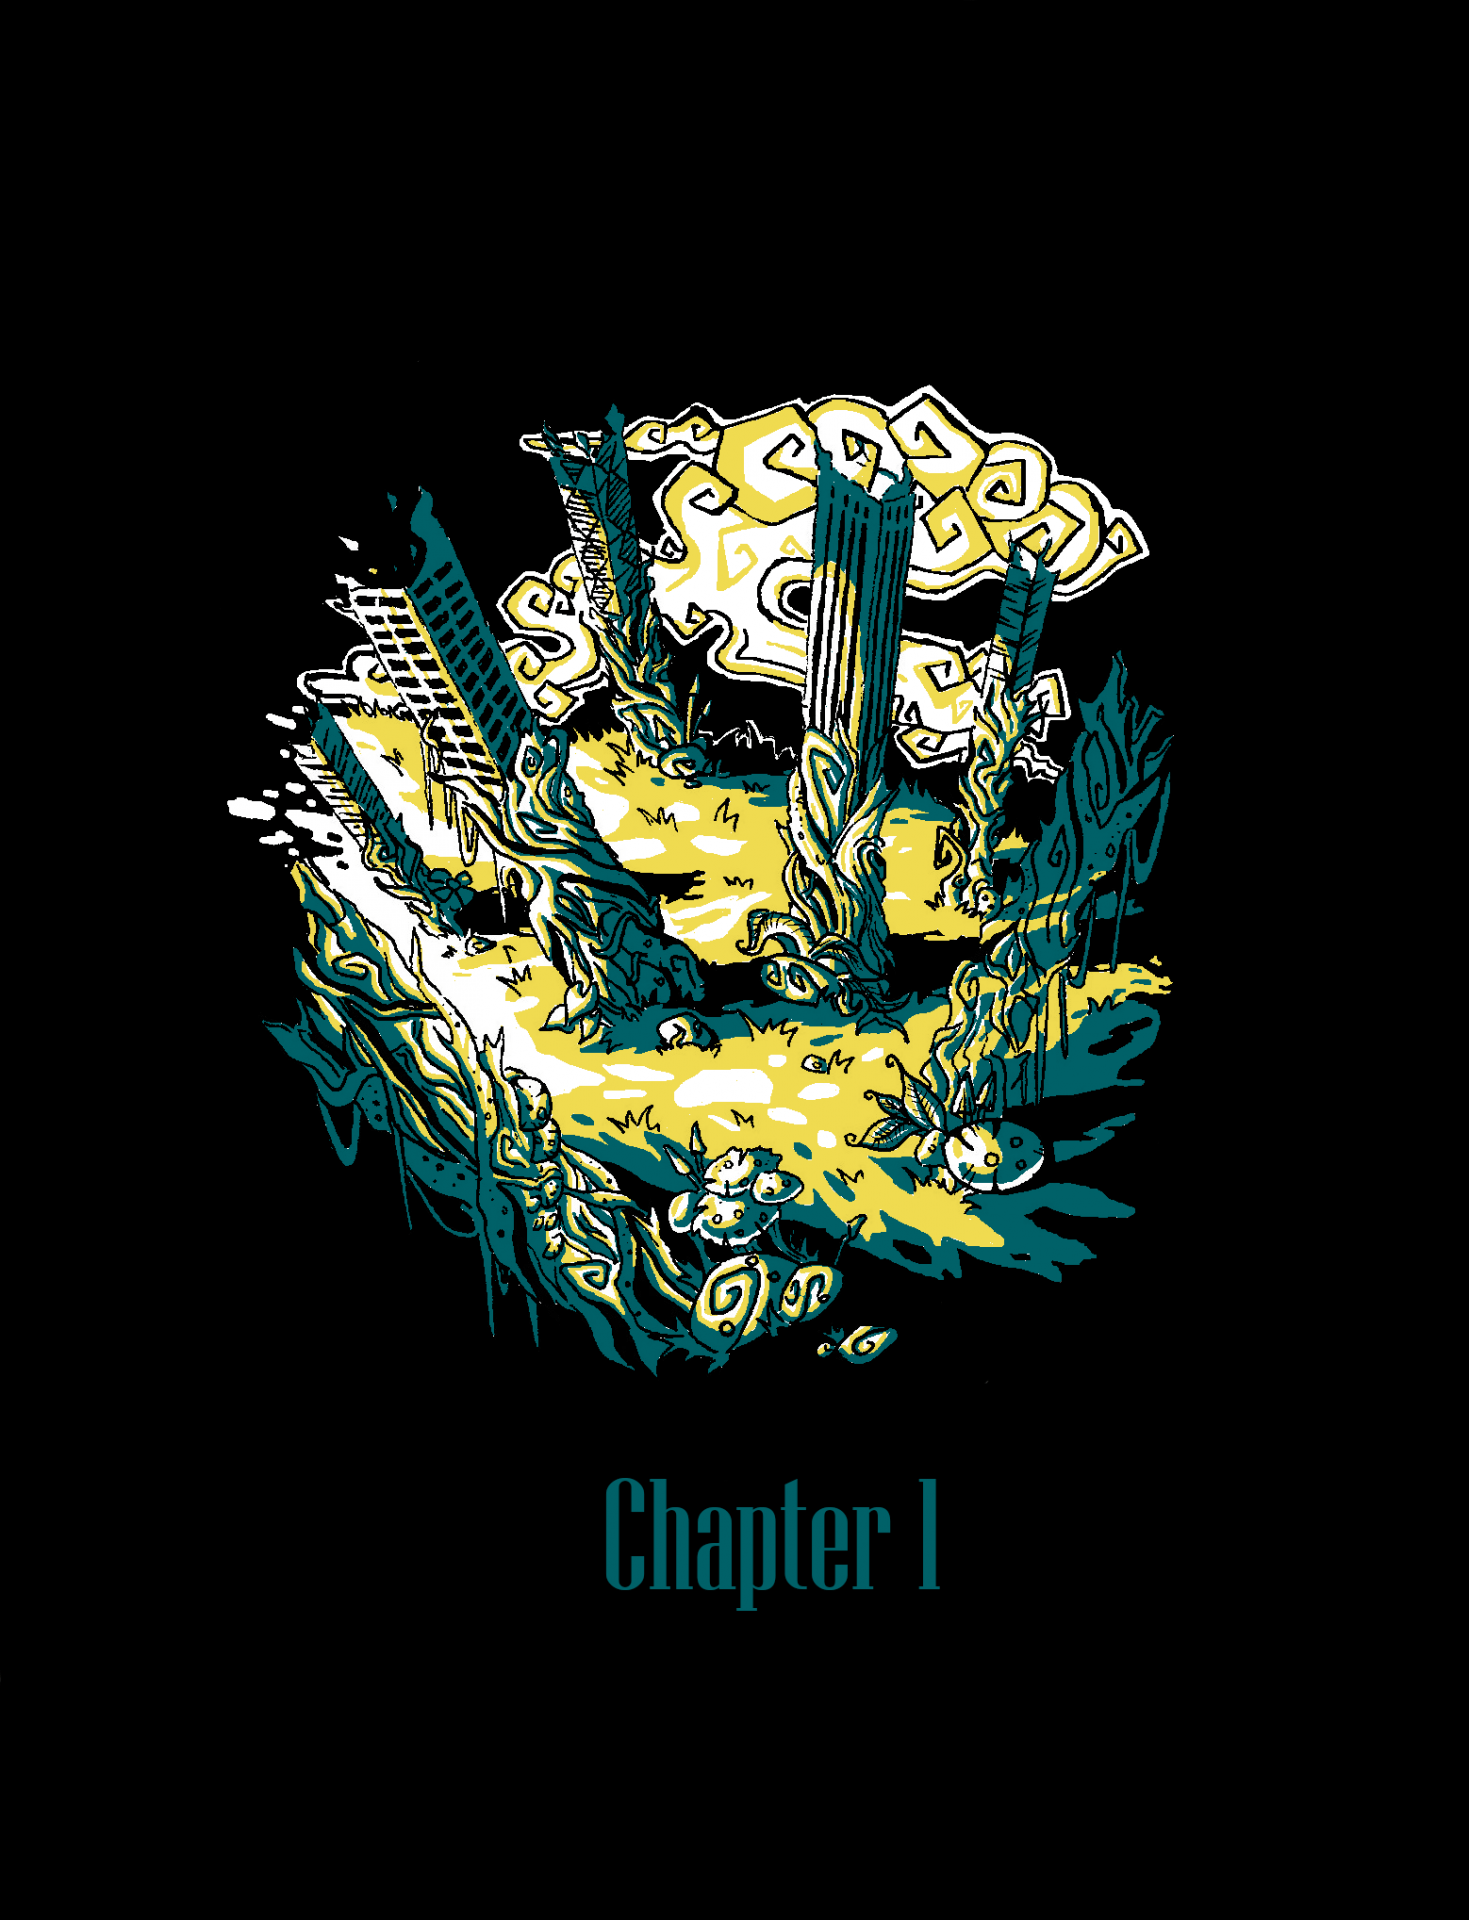 Illustration of plants growing up tall buildings with the caption 'Chapter 1'.